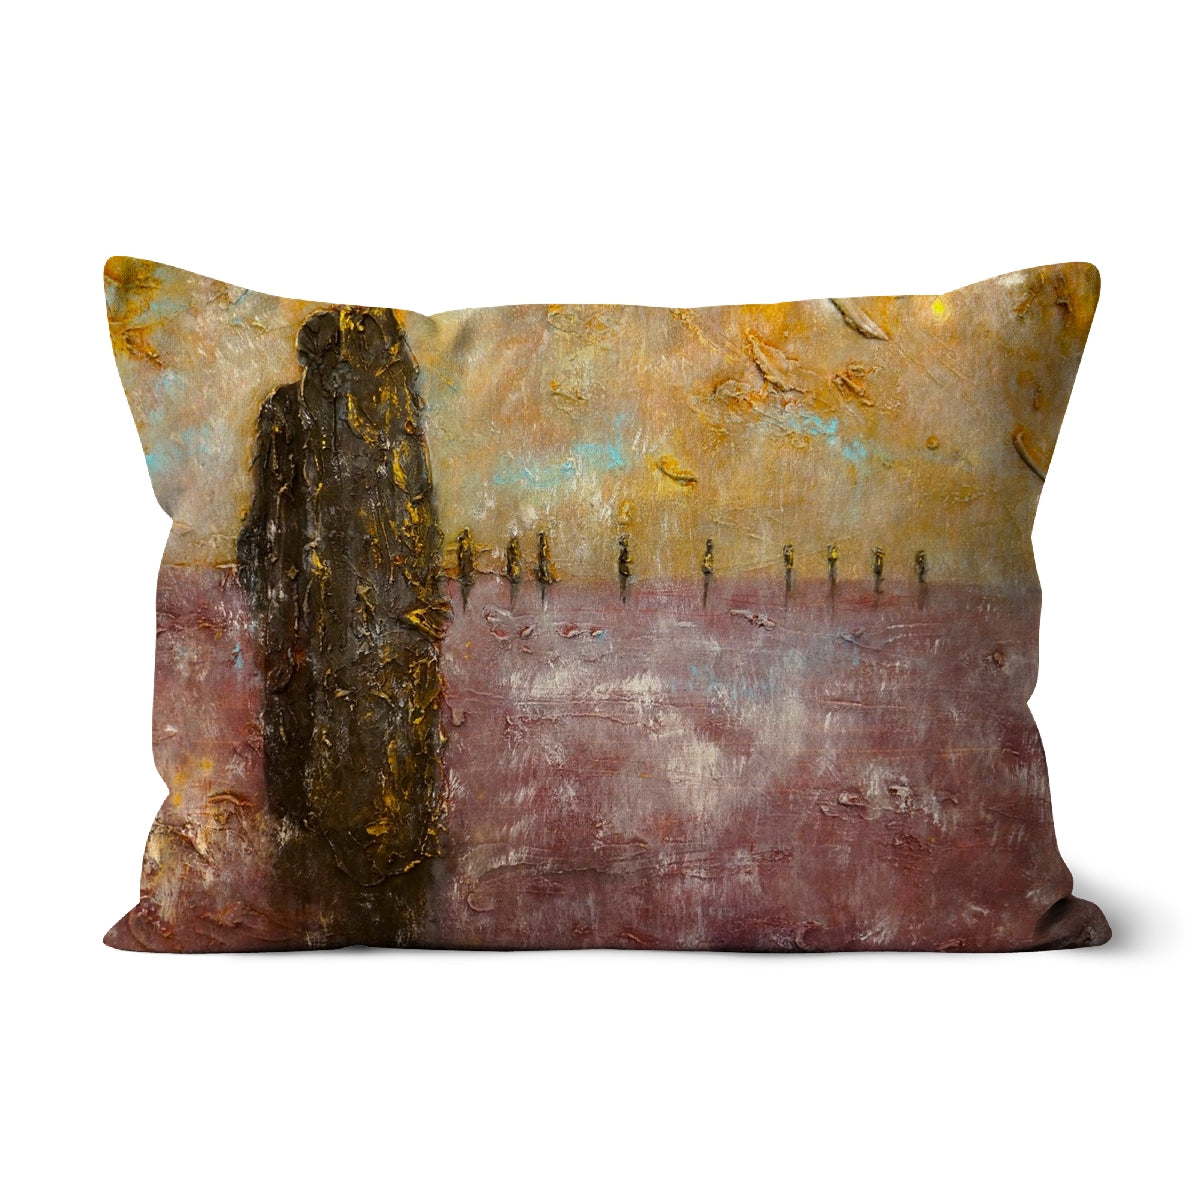 Brodgar Mist Orkney Art Gifts Cushion-Cushions-Orkney Art Gallery-Faux Suede-19"x13"-Paintings, Prints, Homeware, Art Gifts From Scotland By Scottish Artist Kevin Hunter